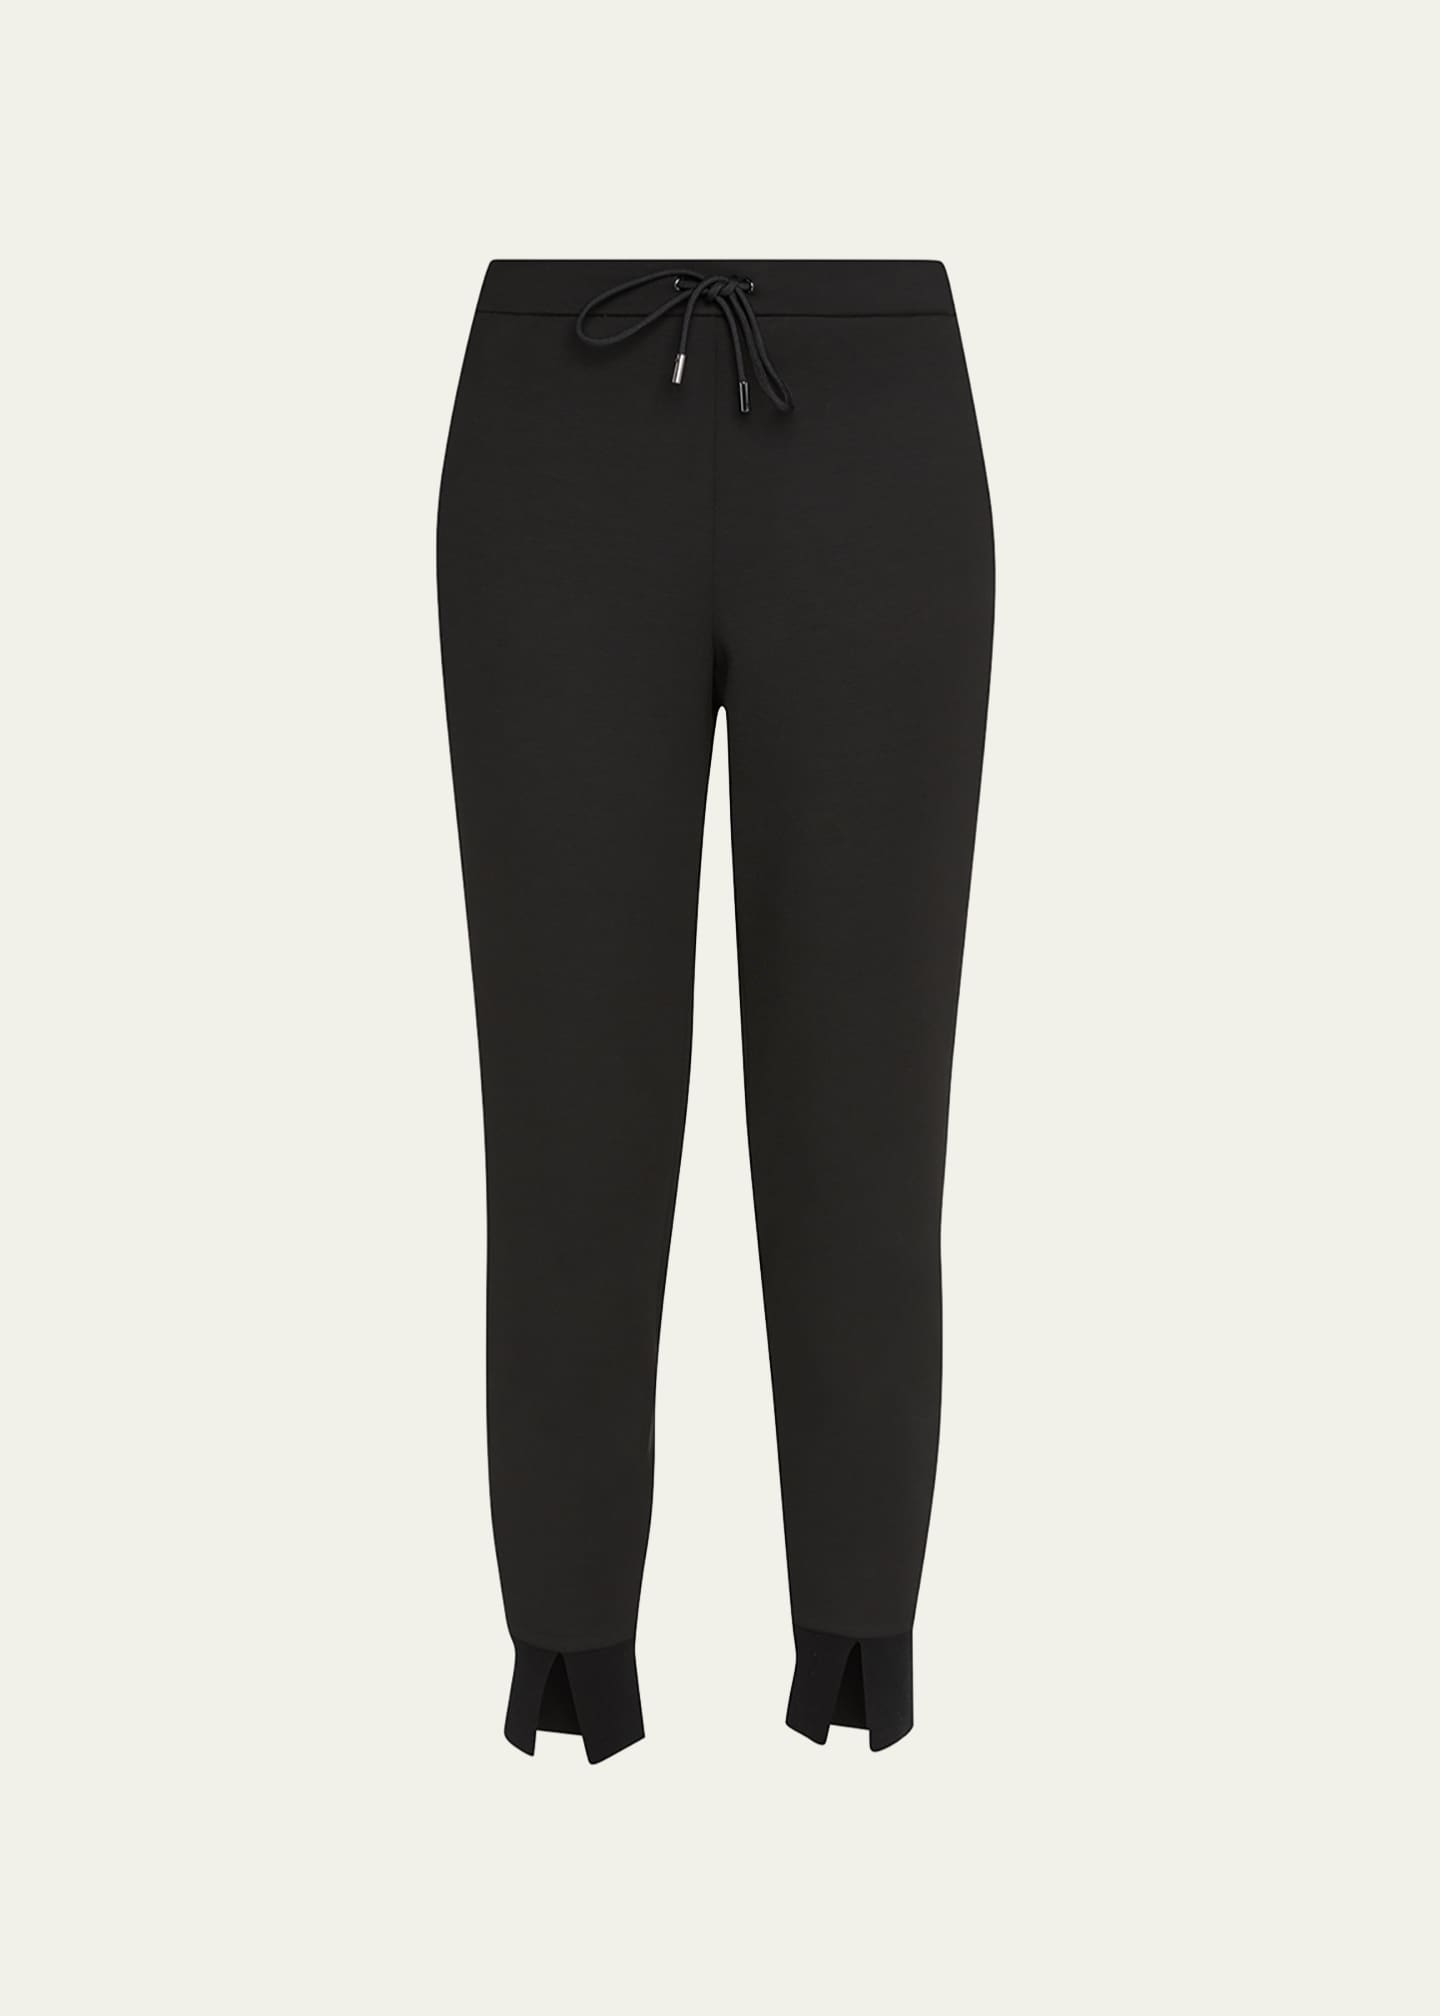 Theory Slouchy Double-Knit Jogger Pants